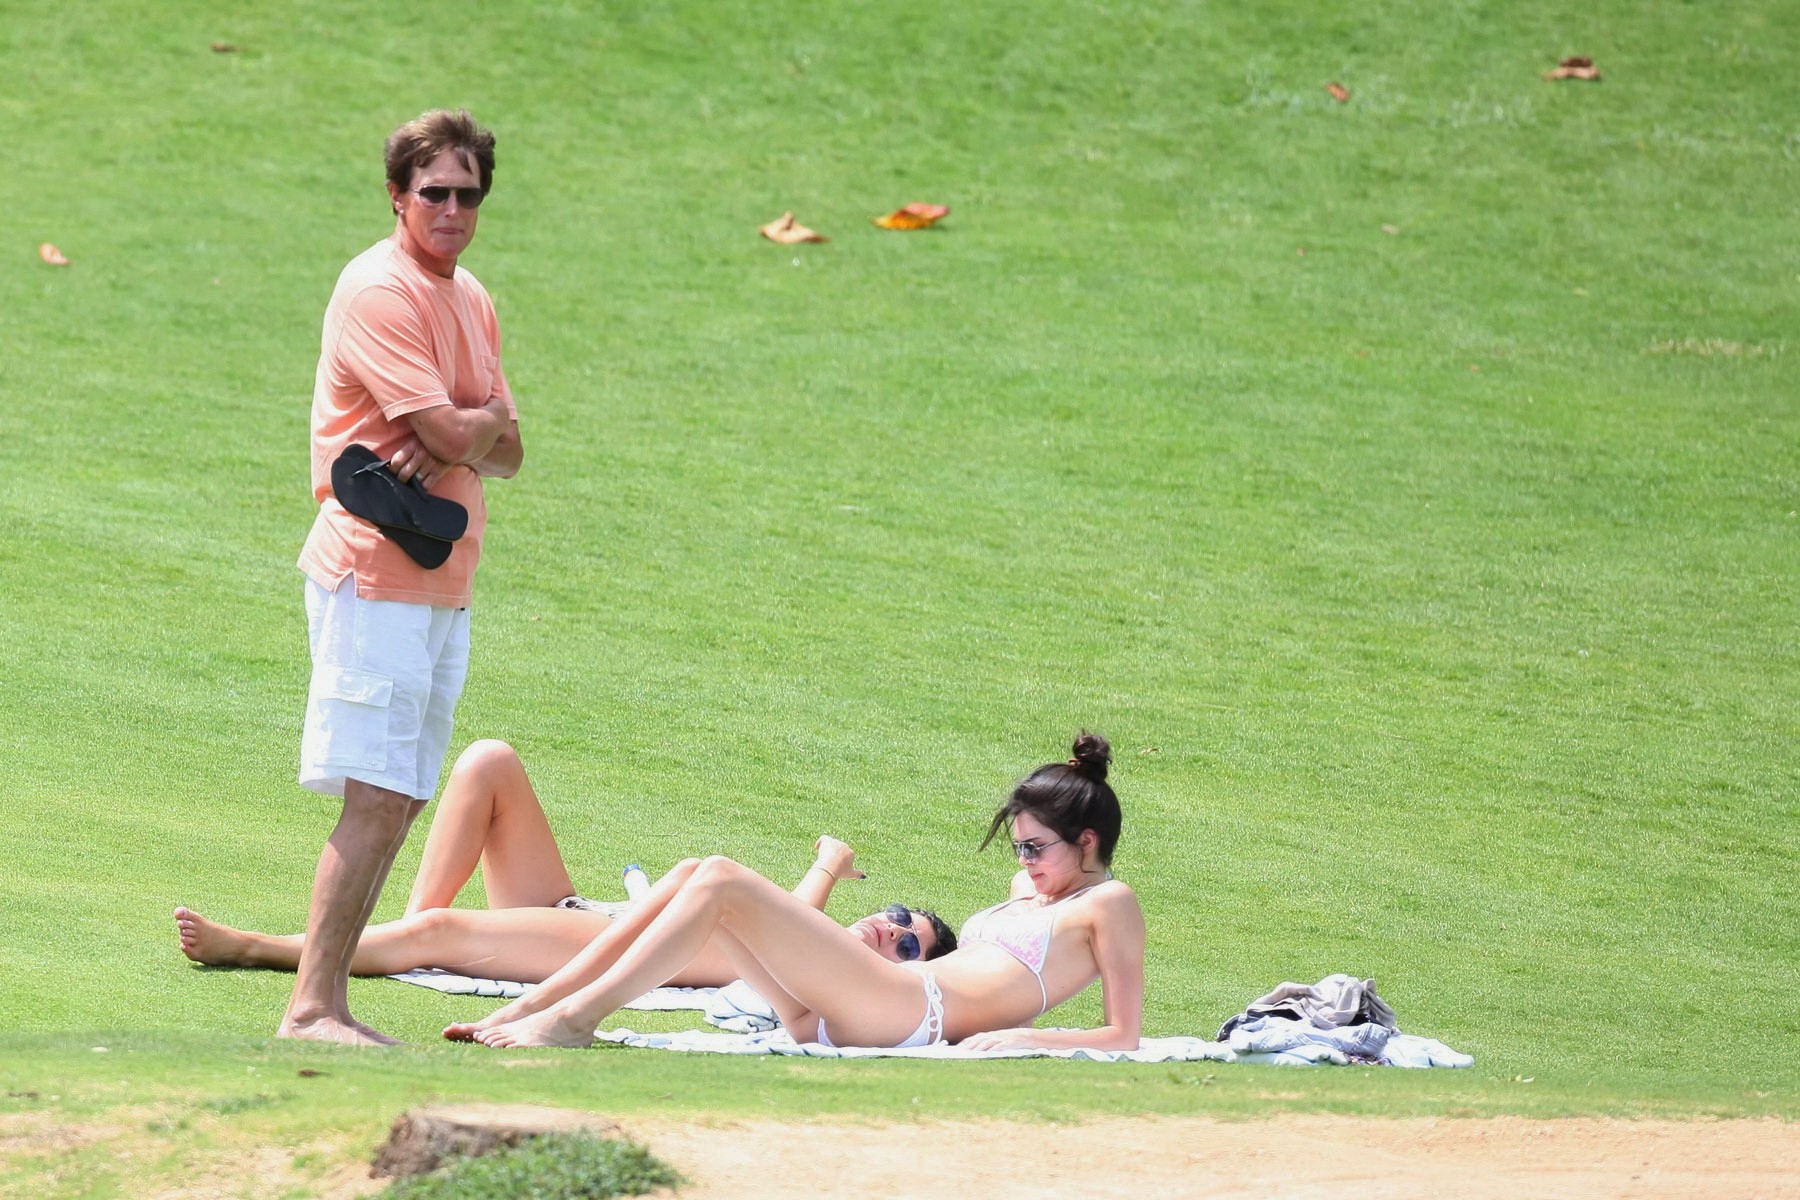 Kylie and Kendall Jenner tanning their hot bodies in skimpy bikini sets on a mea #75174029